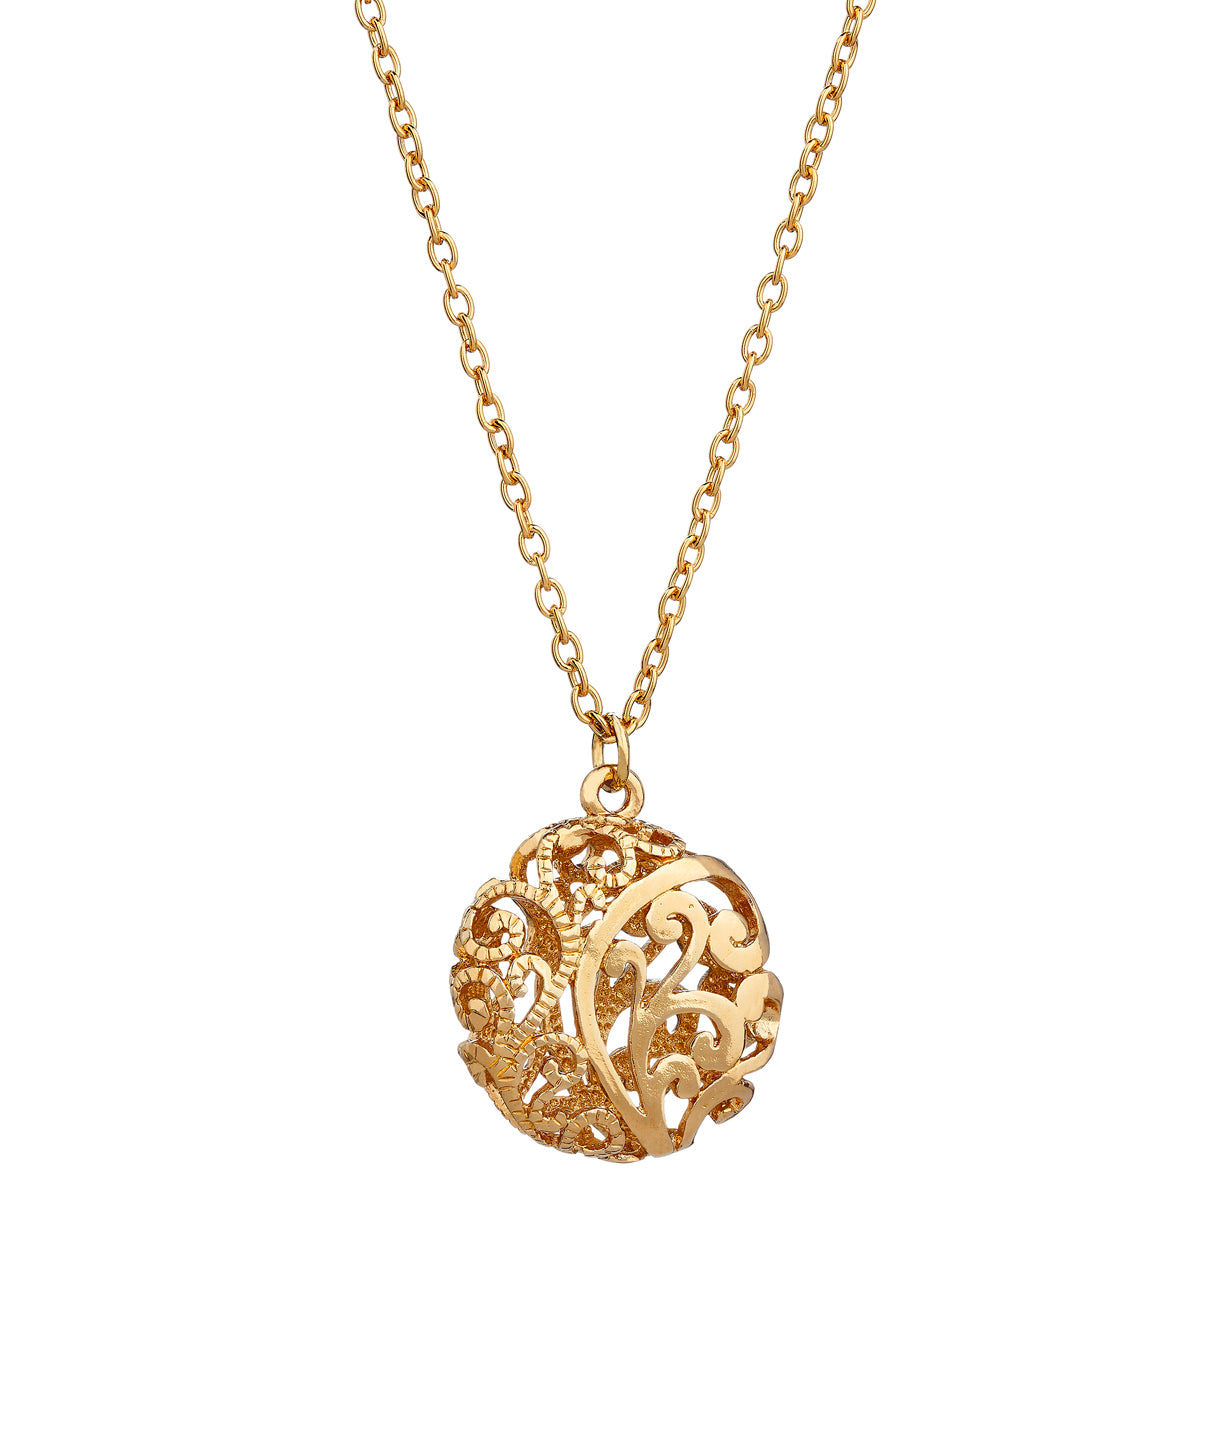 Filigree Flower Round Pendant Gold Plated on a Long Chain. - Mirabelle Jewellery